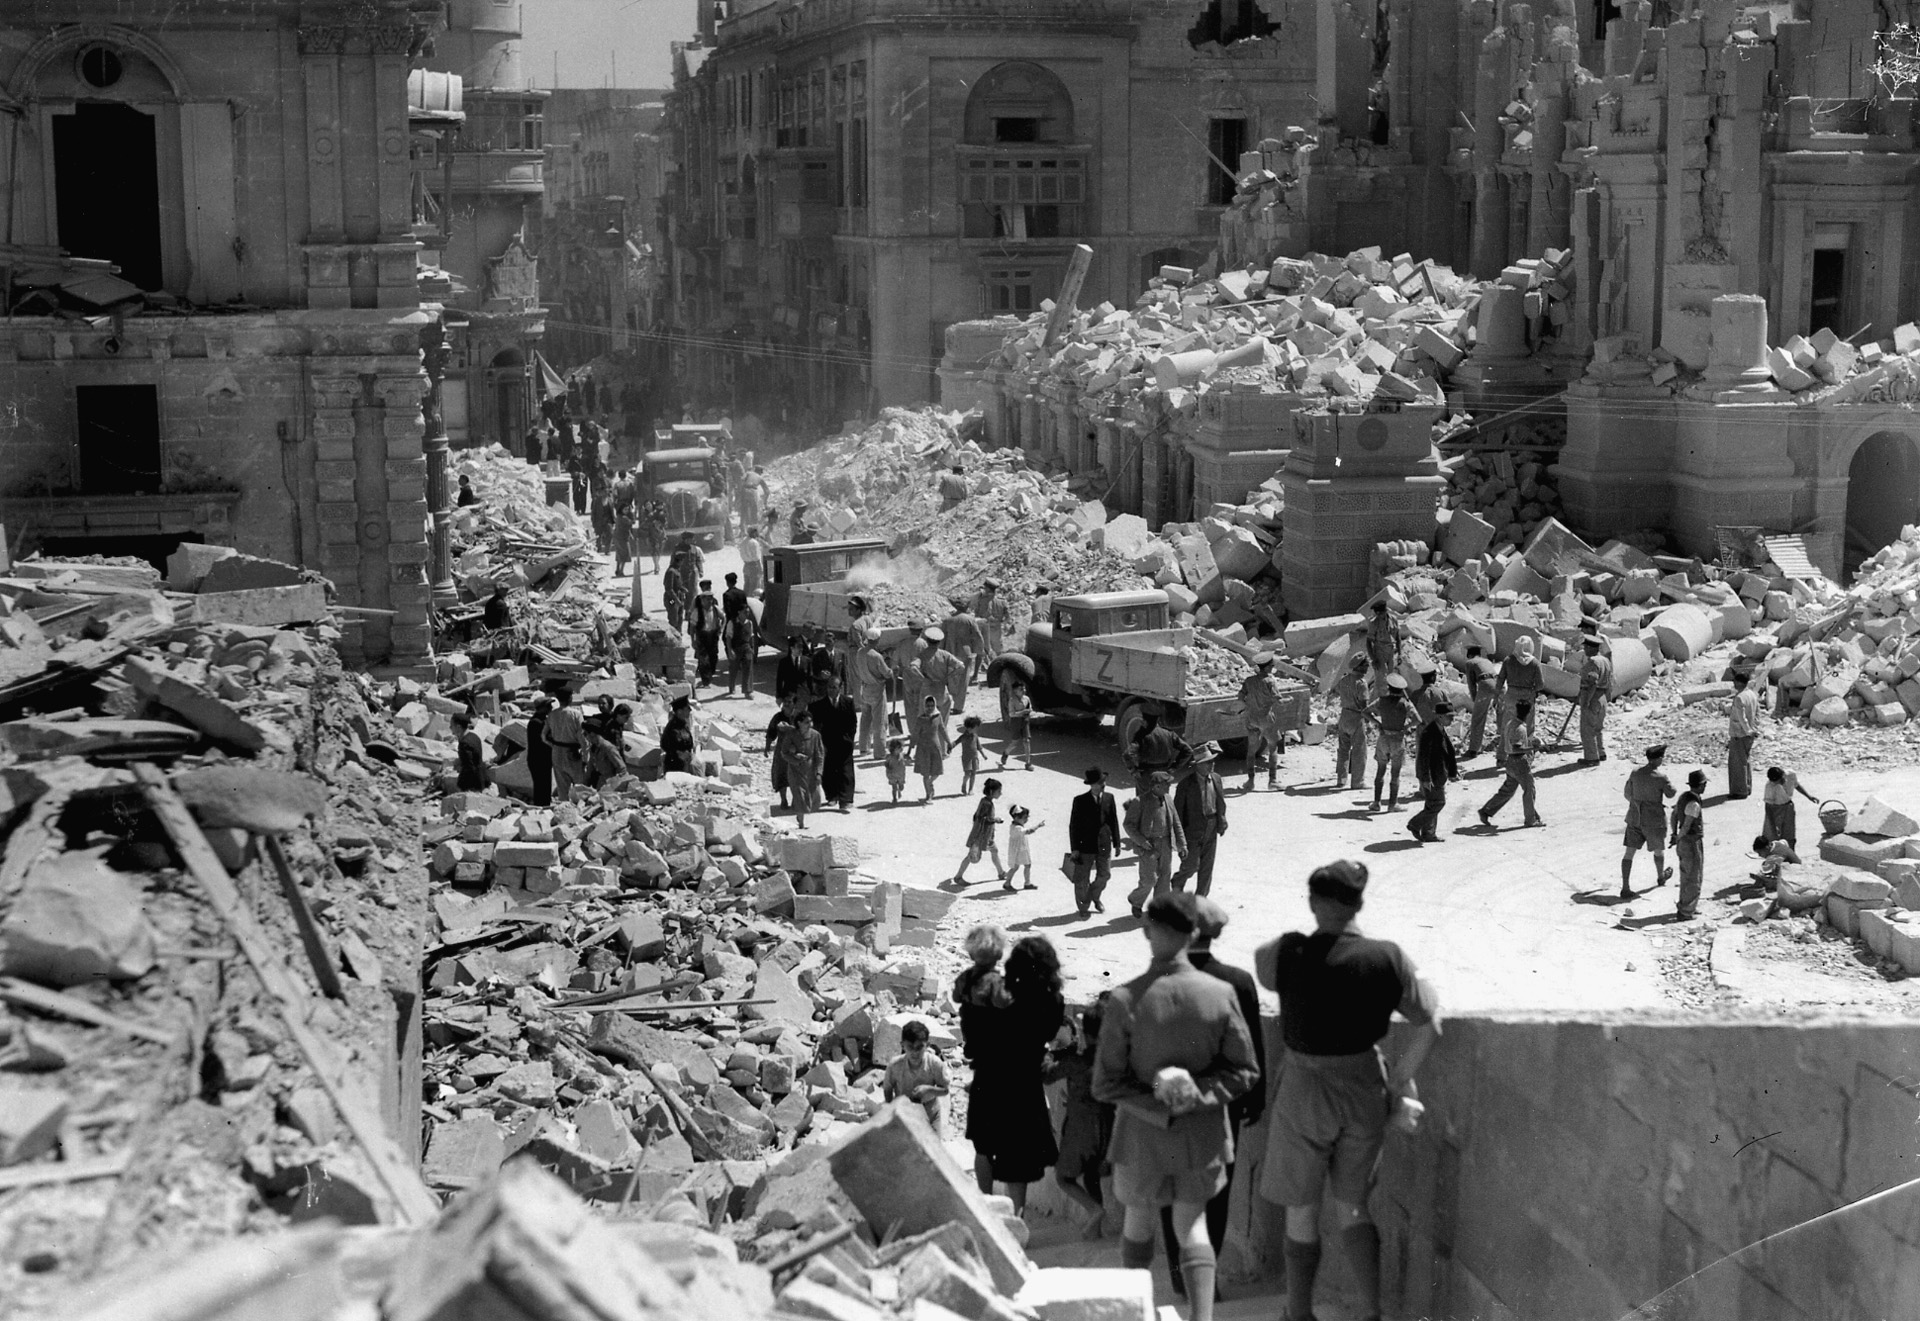 Civilians and military personnel walk through the devastated streets of a Maltese town. At times, the capabilities of British forces to defend the island were nearly decimated.